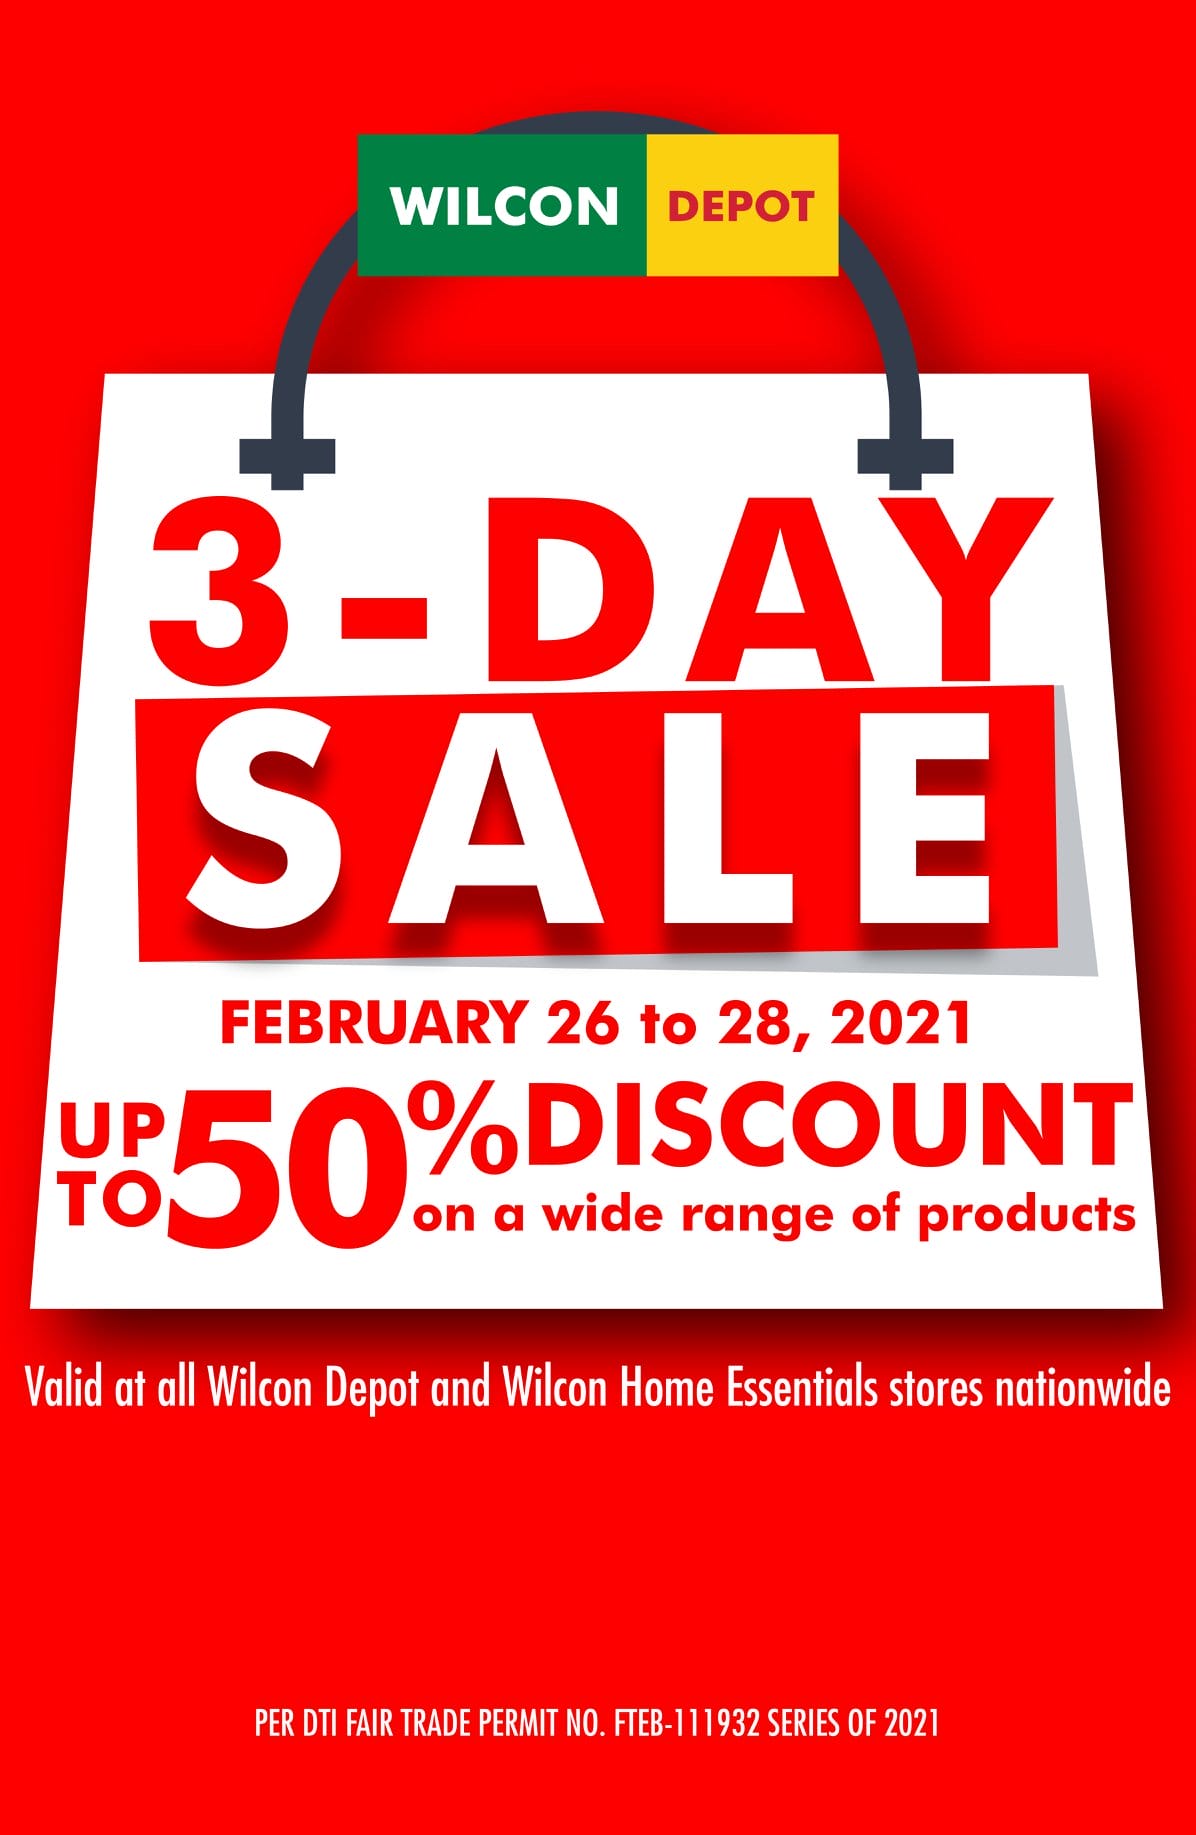 Wilcon Depot - 3-Day Sale: Up to 50% Discount | Deals Pinoy